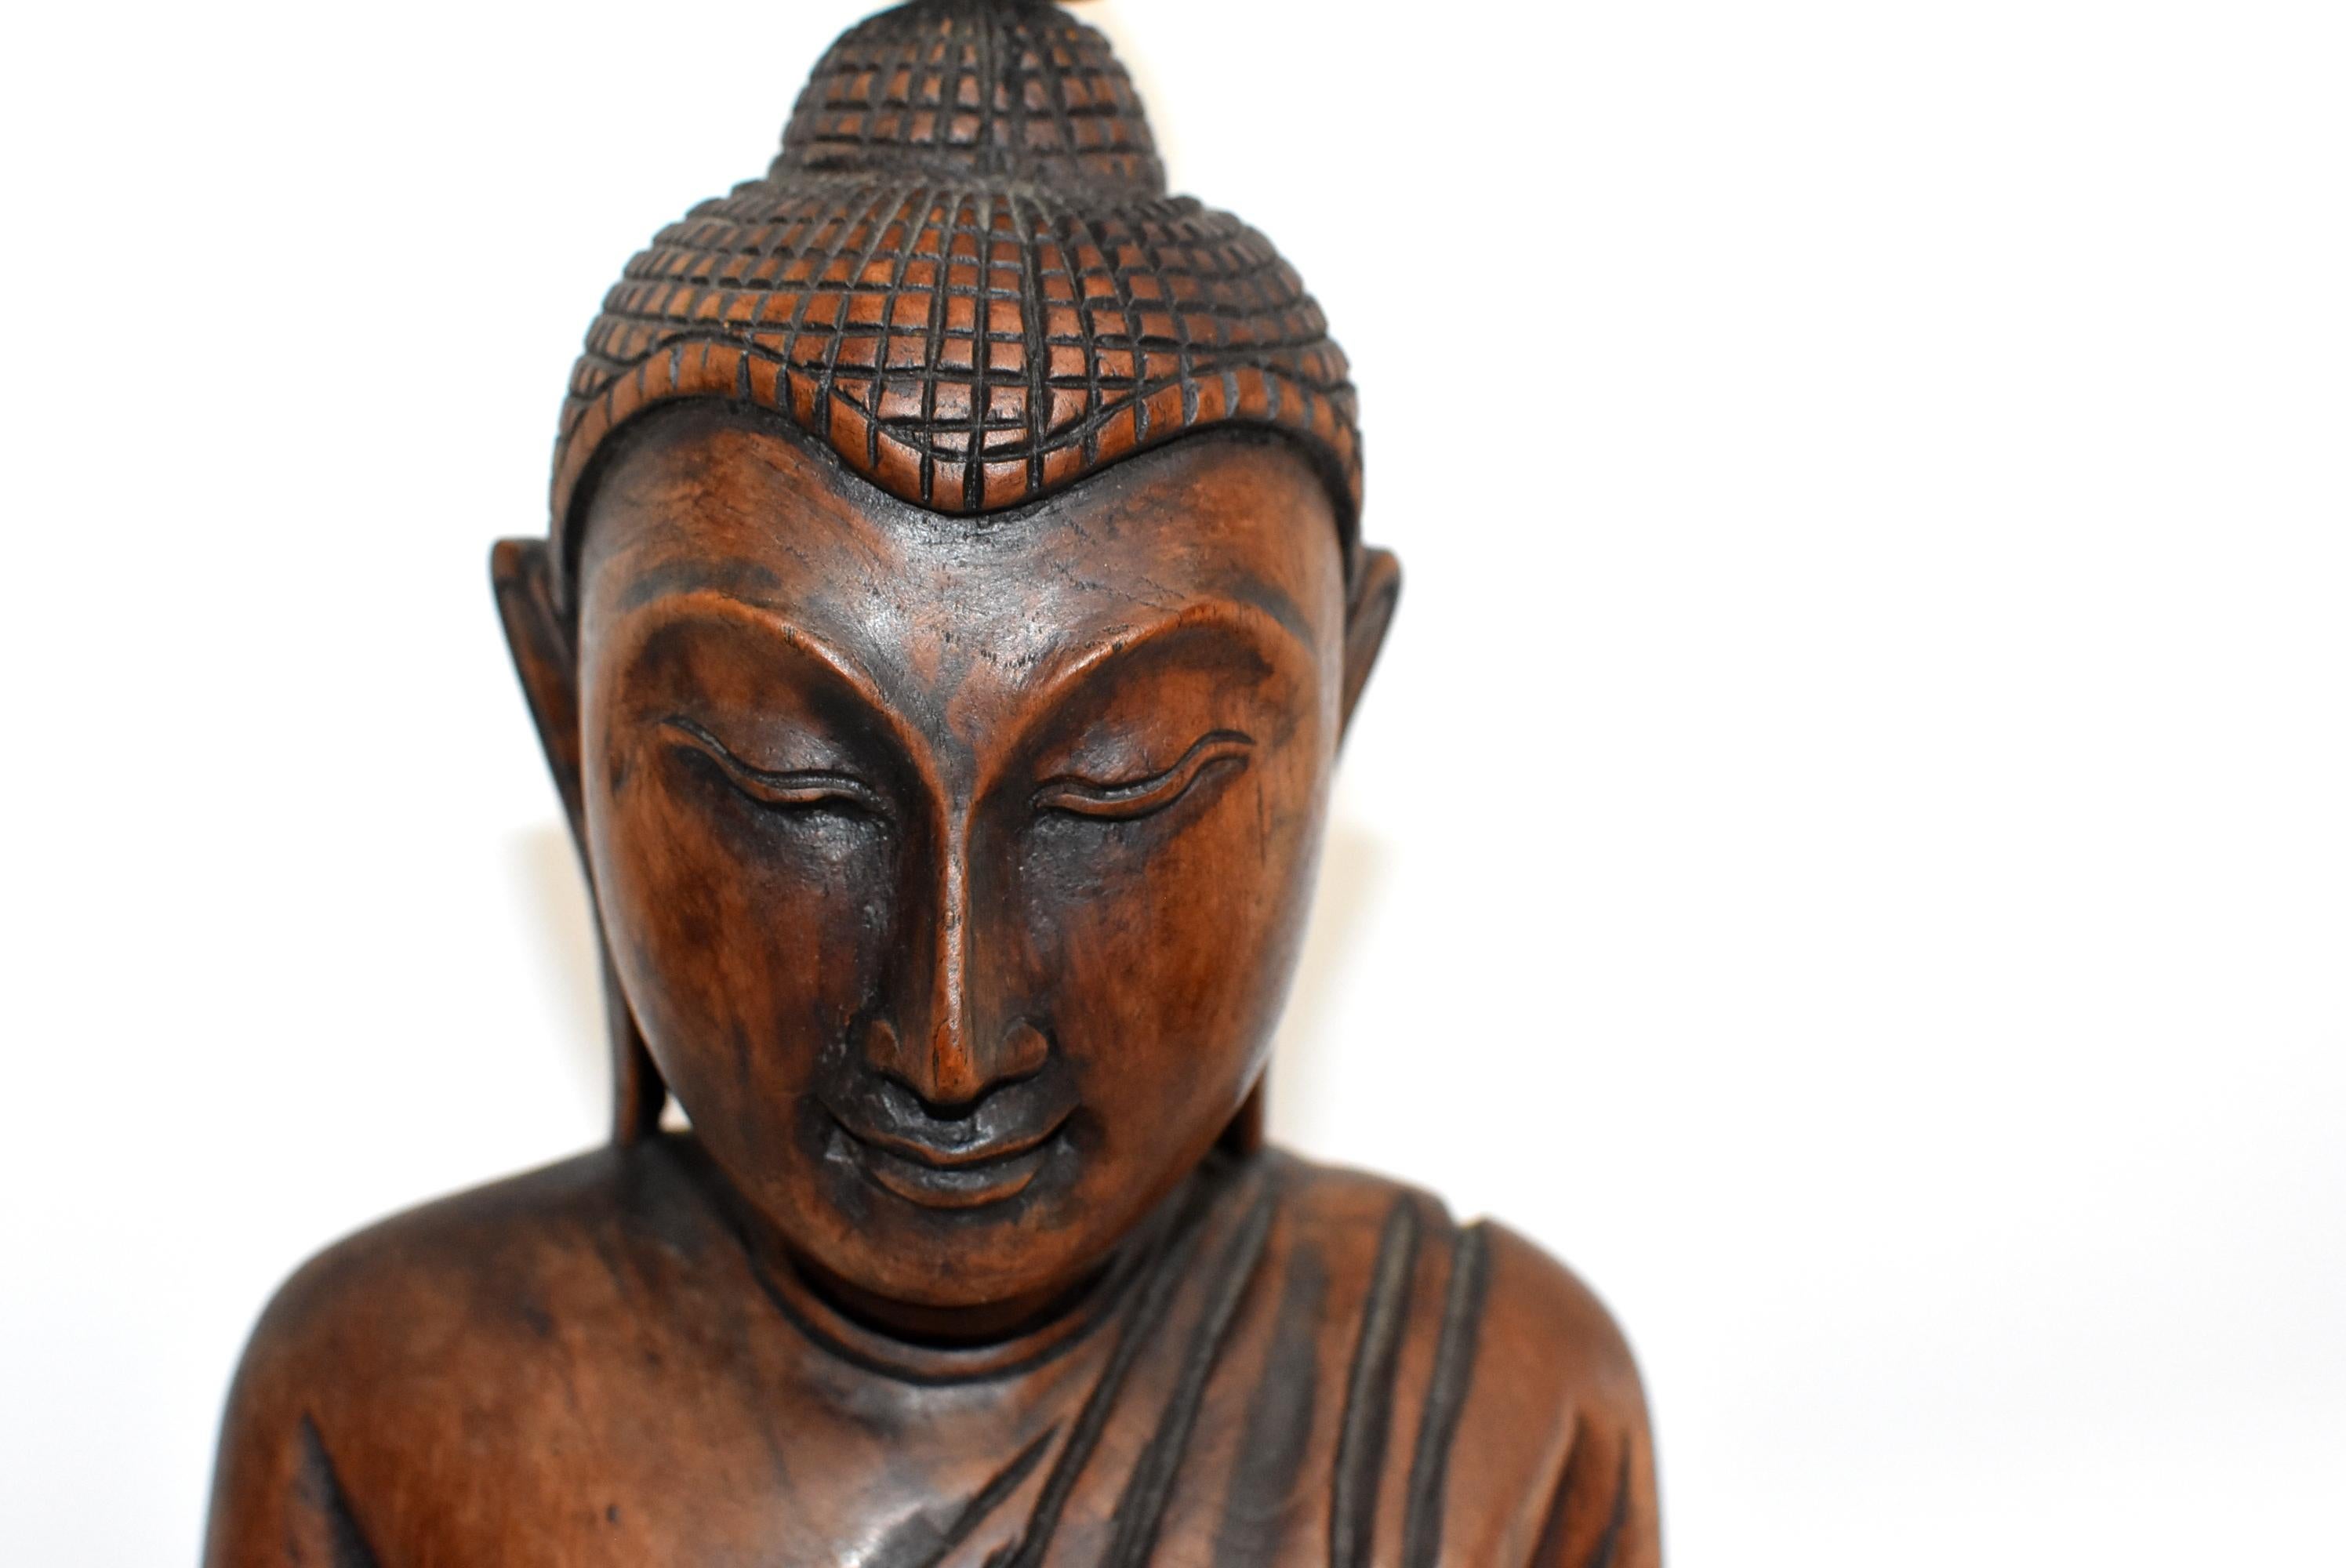 A beautiful large statue of Burmese Buddha, hand carved in wood. The work is of a master wood carving artist who is able to convey peace and harmony through this work of art. Buddha has the traditional long ears, curved eye brows and wonderful full